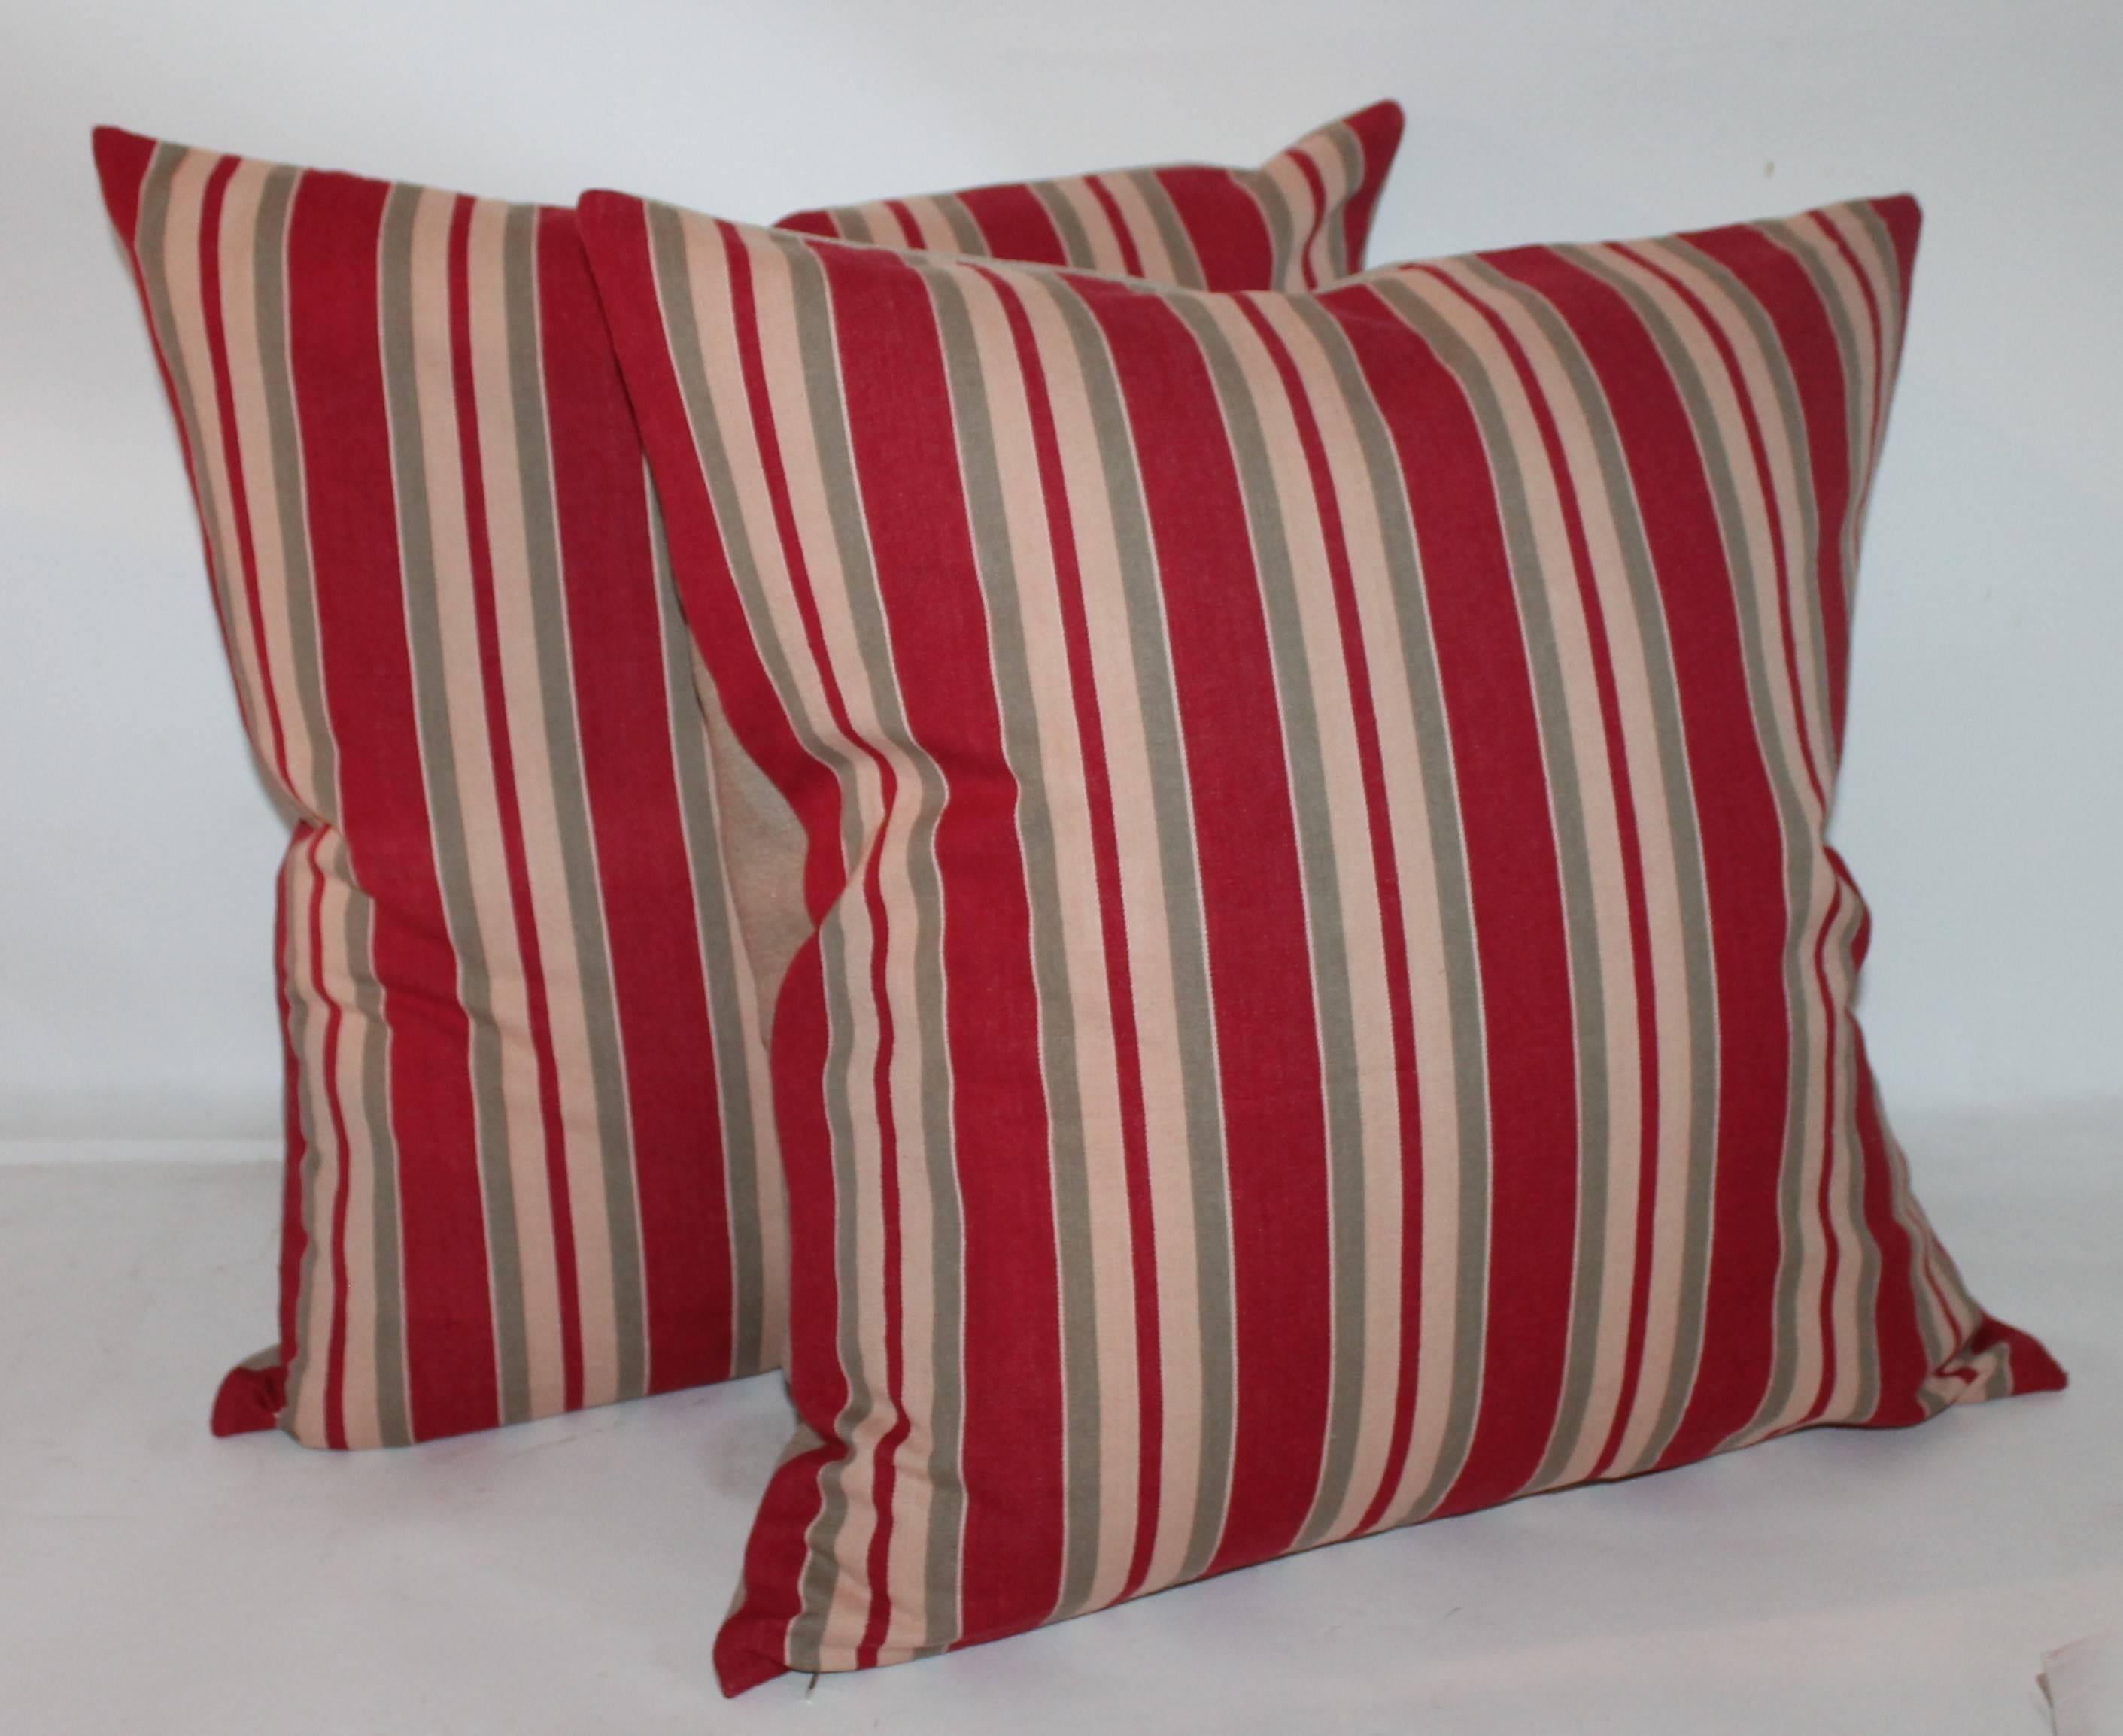 These tan and red striped ticking pillows are in fine condition. The backings are in a cream cotton linen. Four pairs in stock 20 x 20 / 22 x 22.